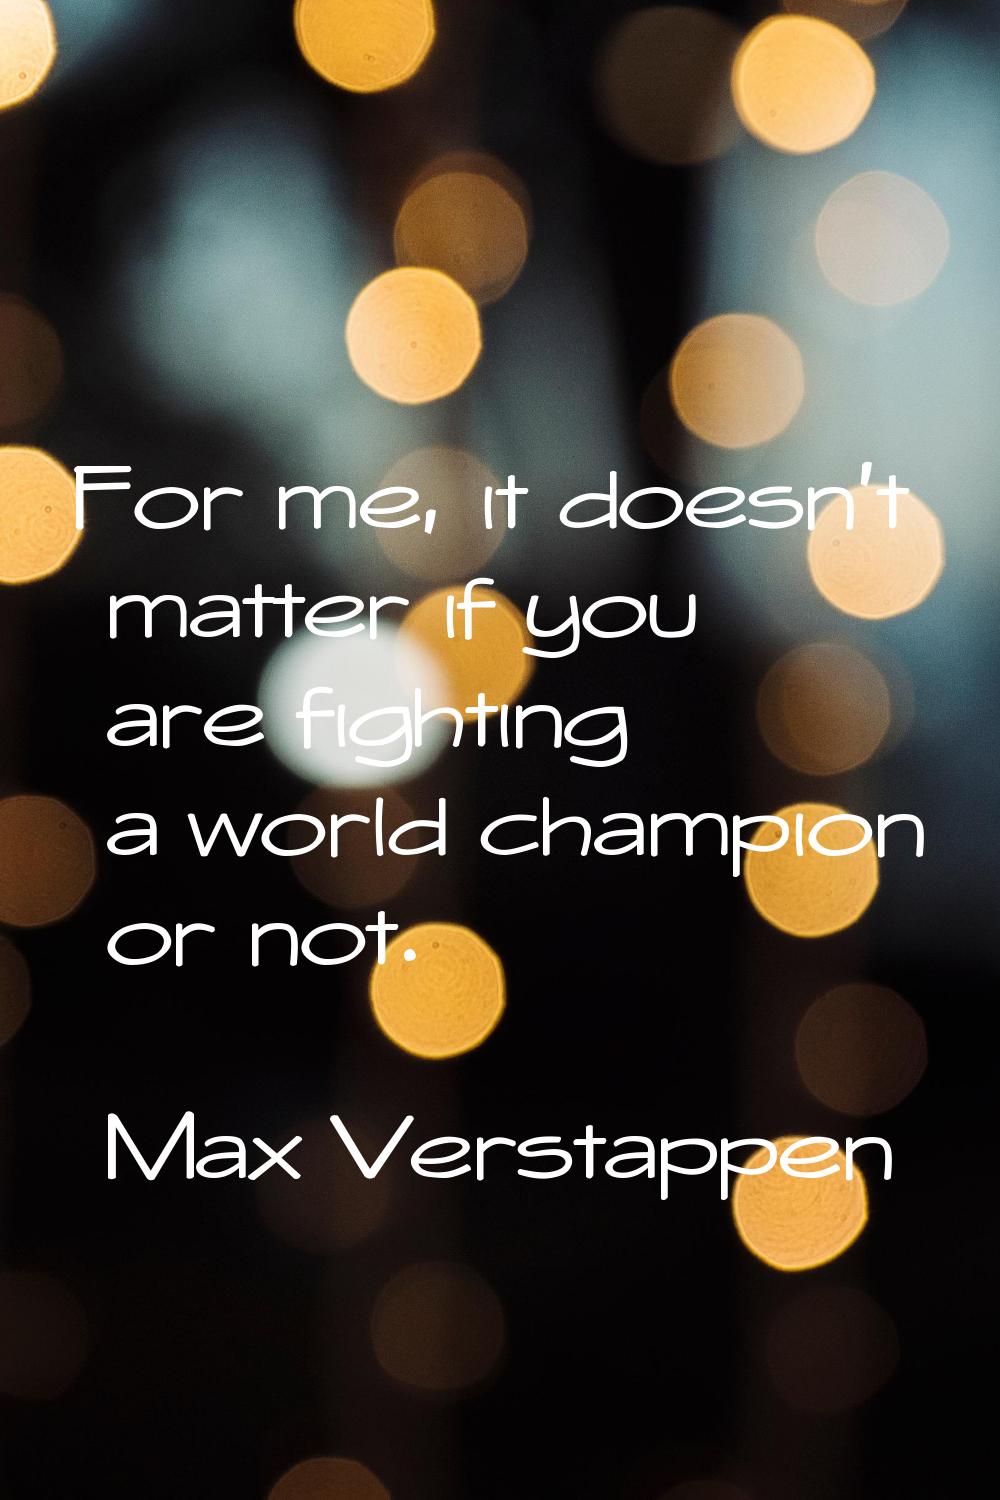 For me, it doesn't matter if you are fighting a world champion or not.